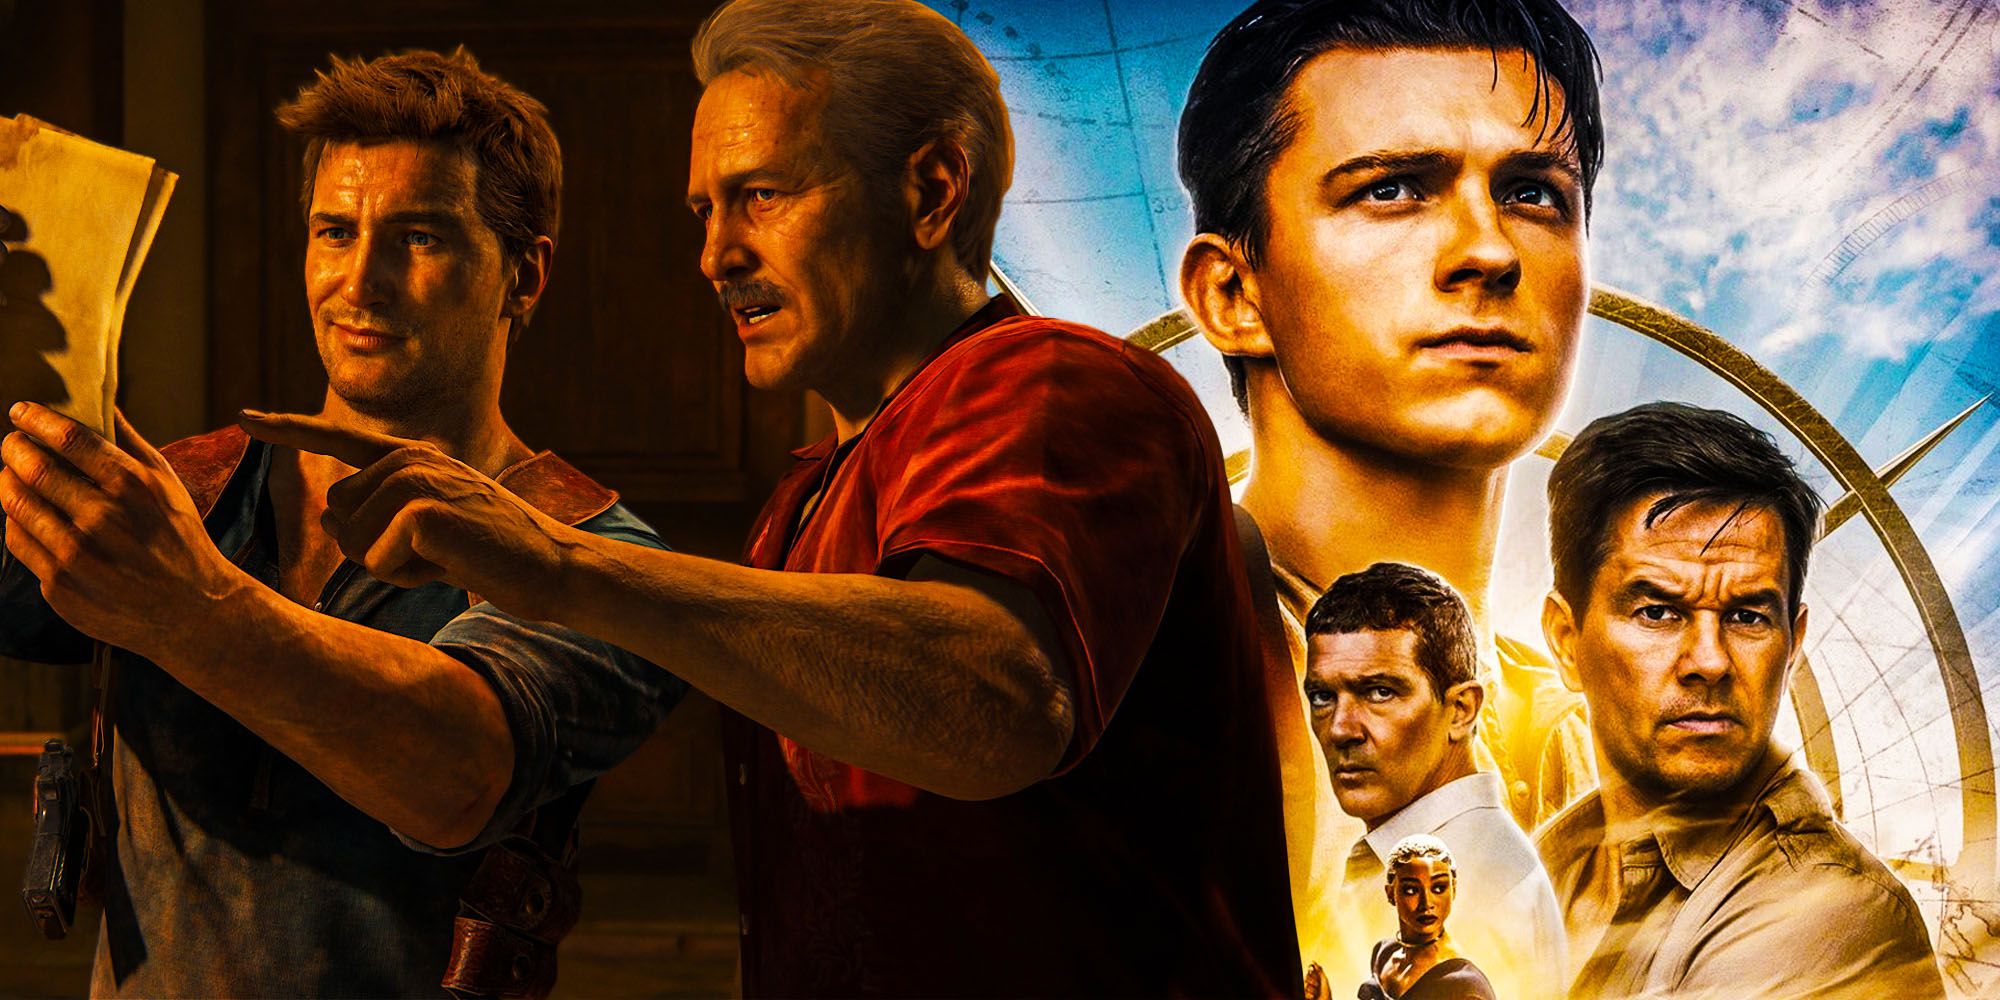 Uncharted cast guide The Characters Compare To The Games